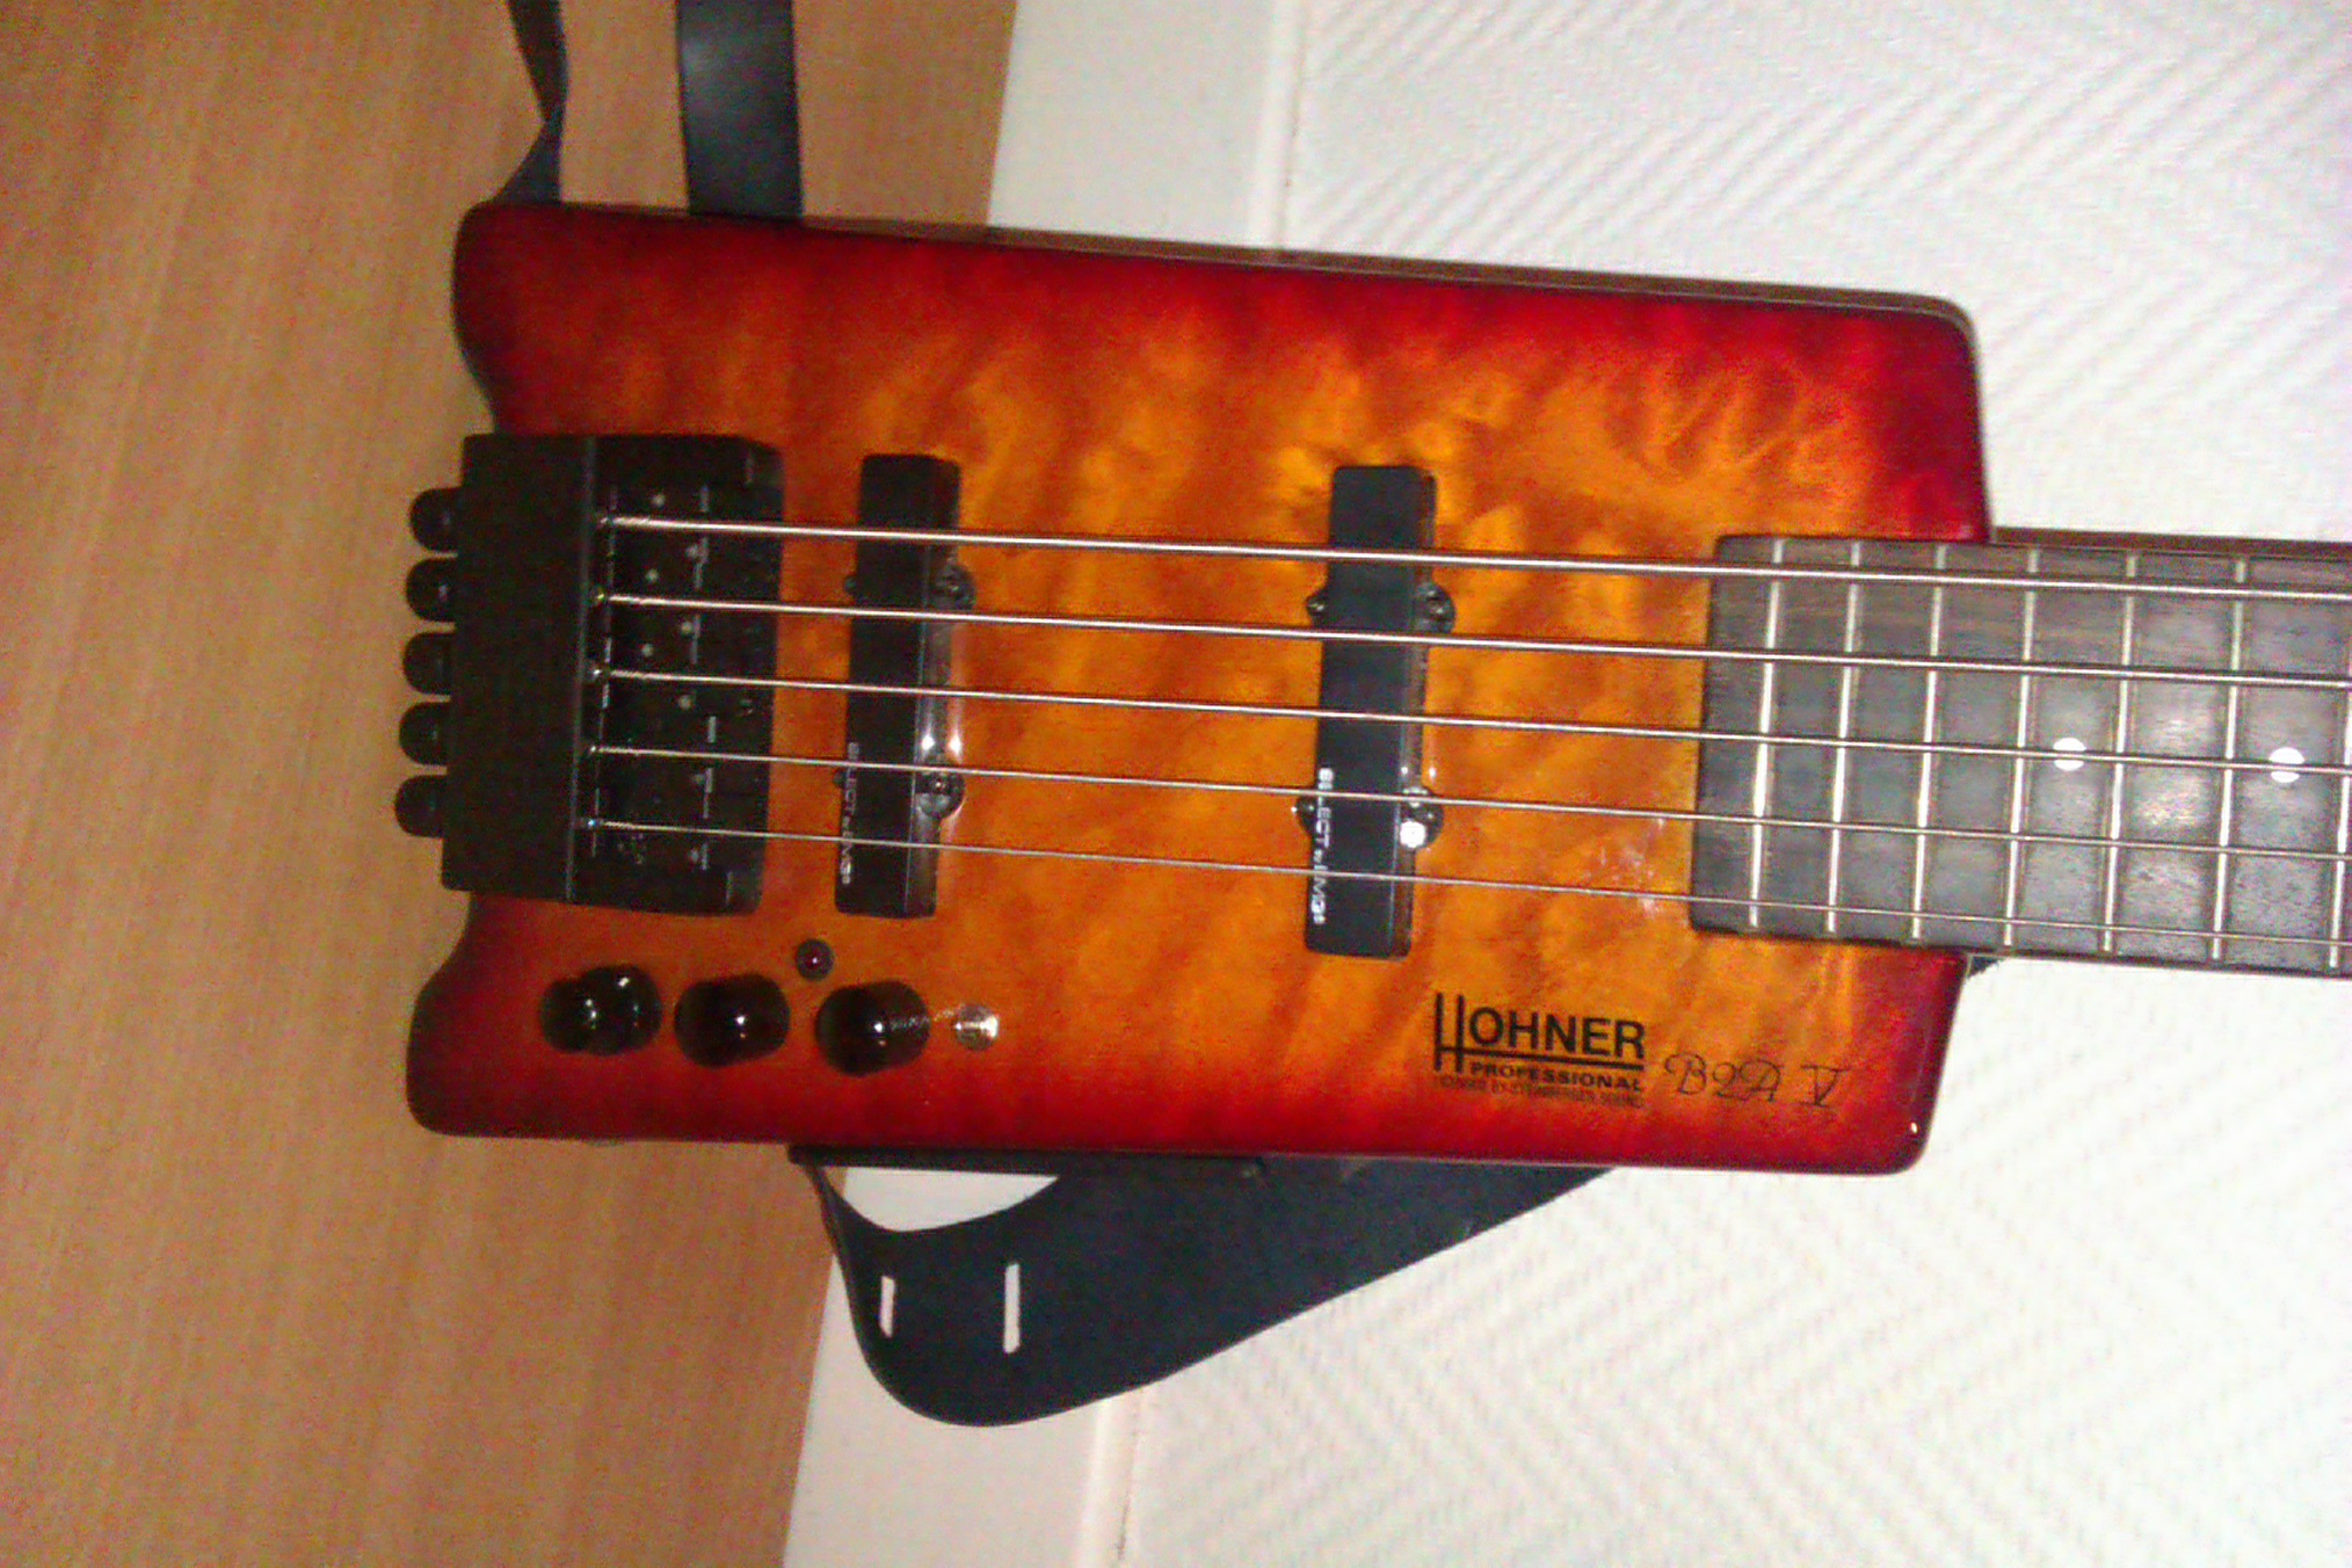 Hohner B Bass 5 Review